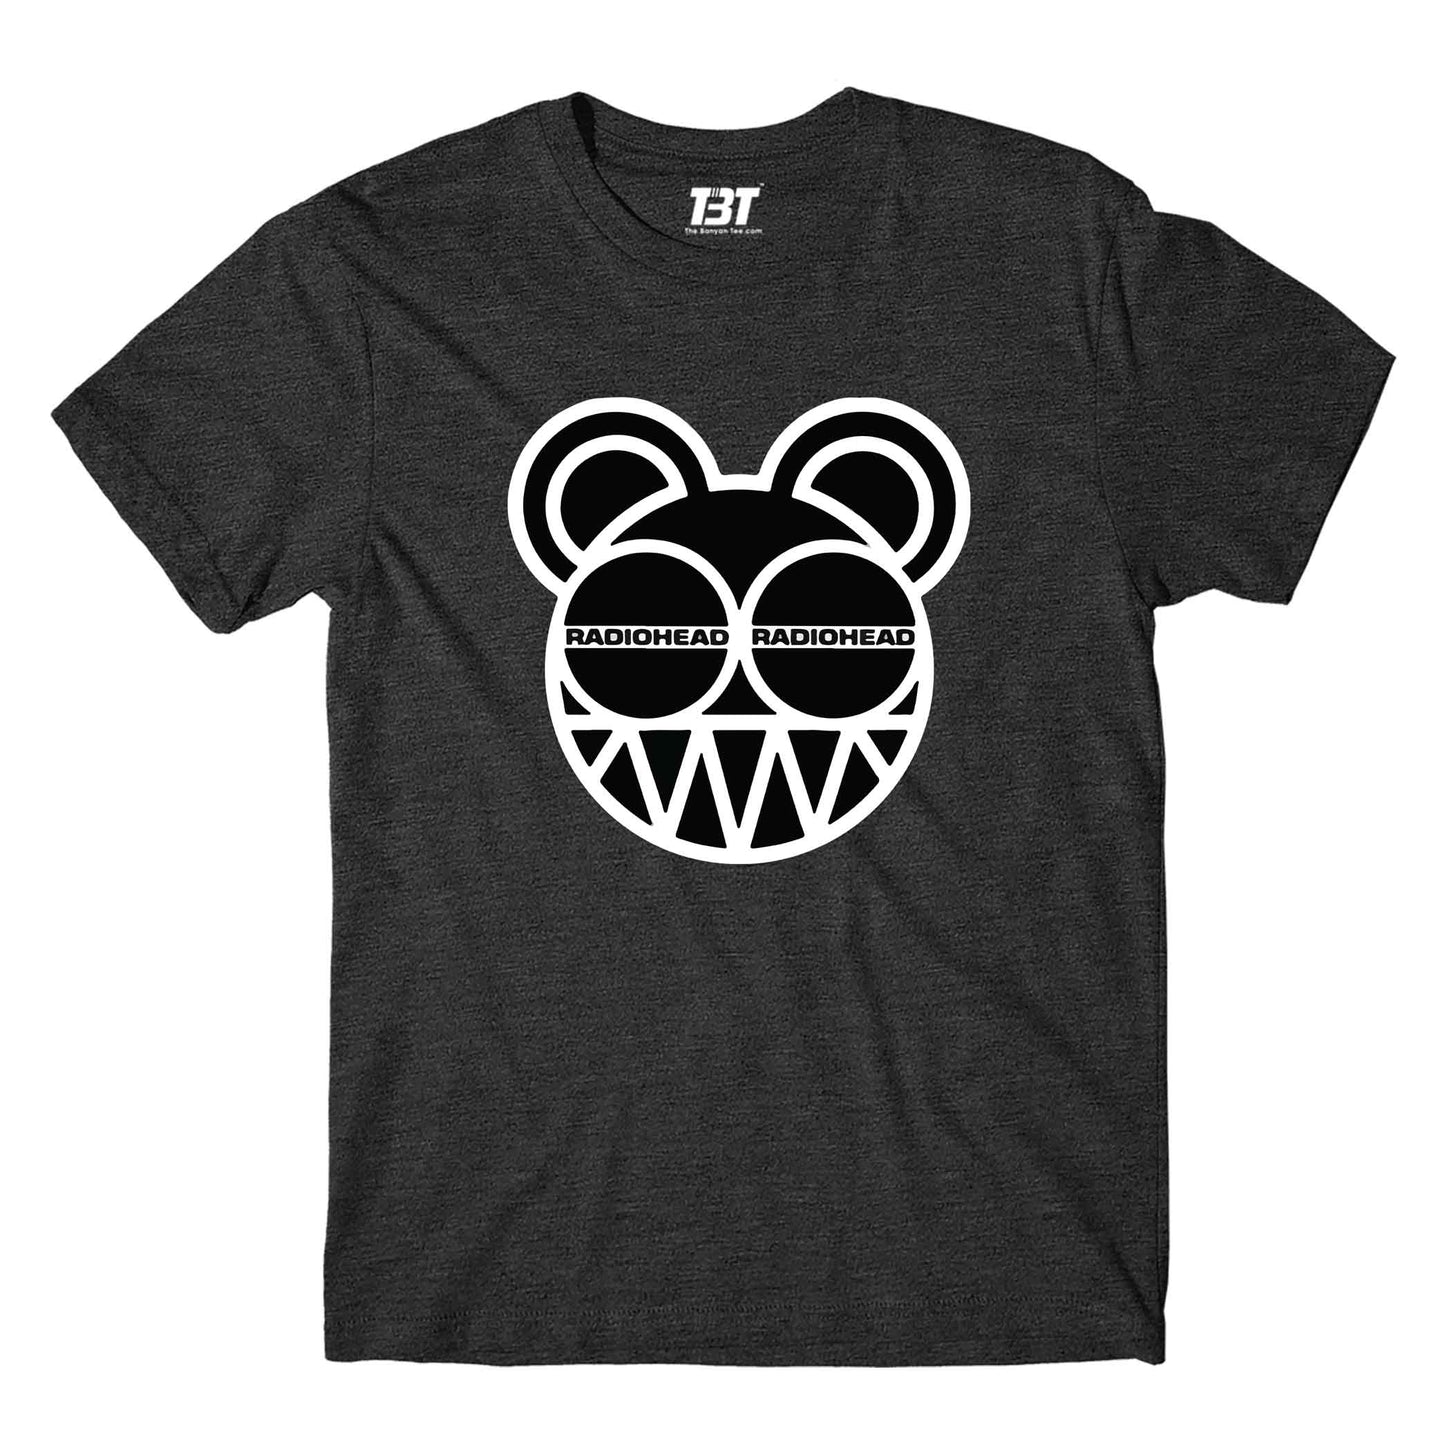 the banyan tee merch on sale Radiohead T shirt - On Sale - M (Chest size 40 IN)